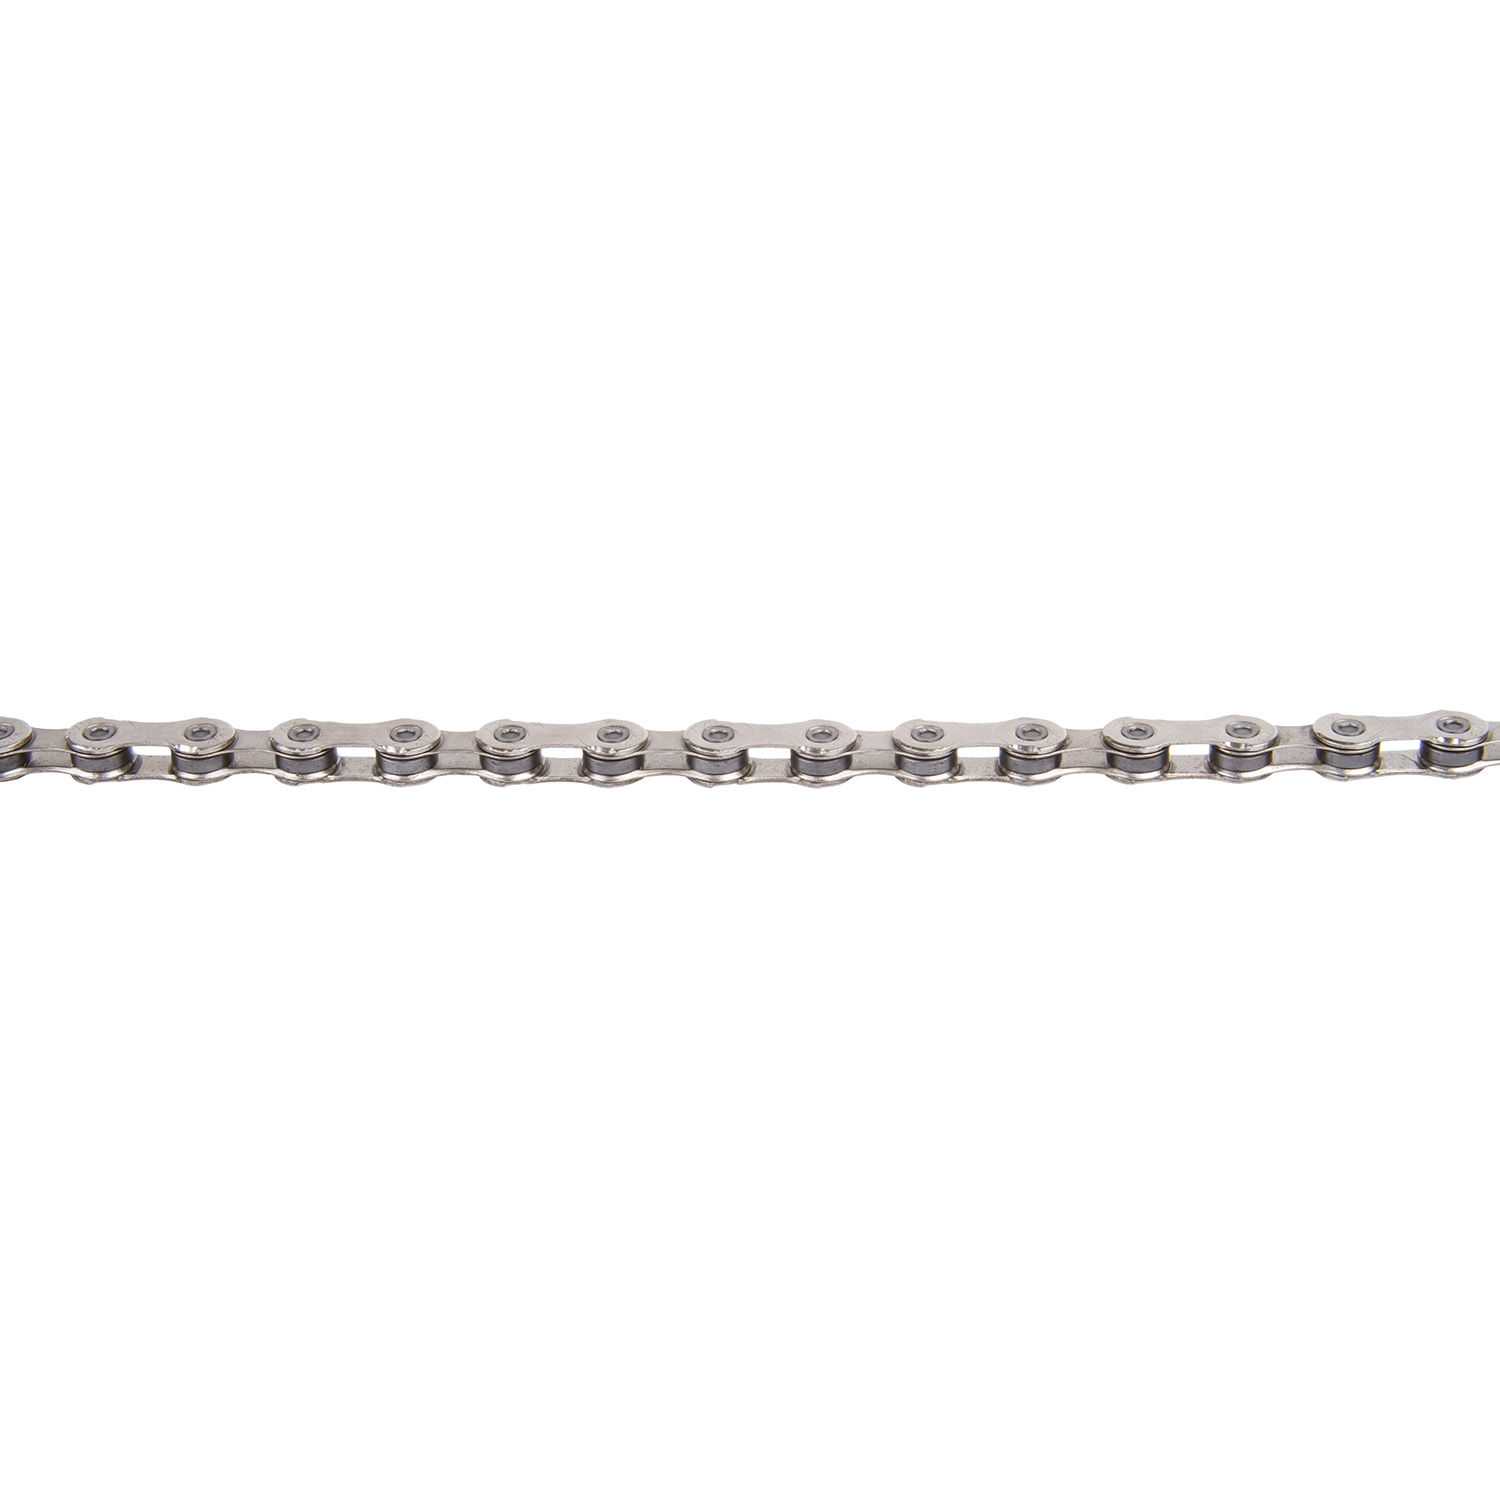 303512 KMC X12 Silver derailleur chain – AVAILABLE IN SELECTED BIKE SHOPS